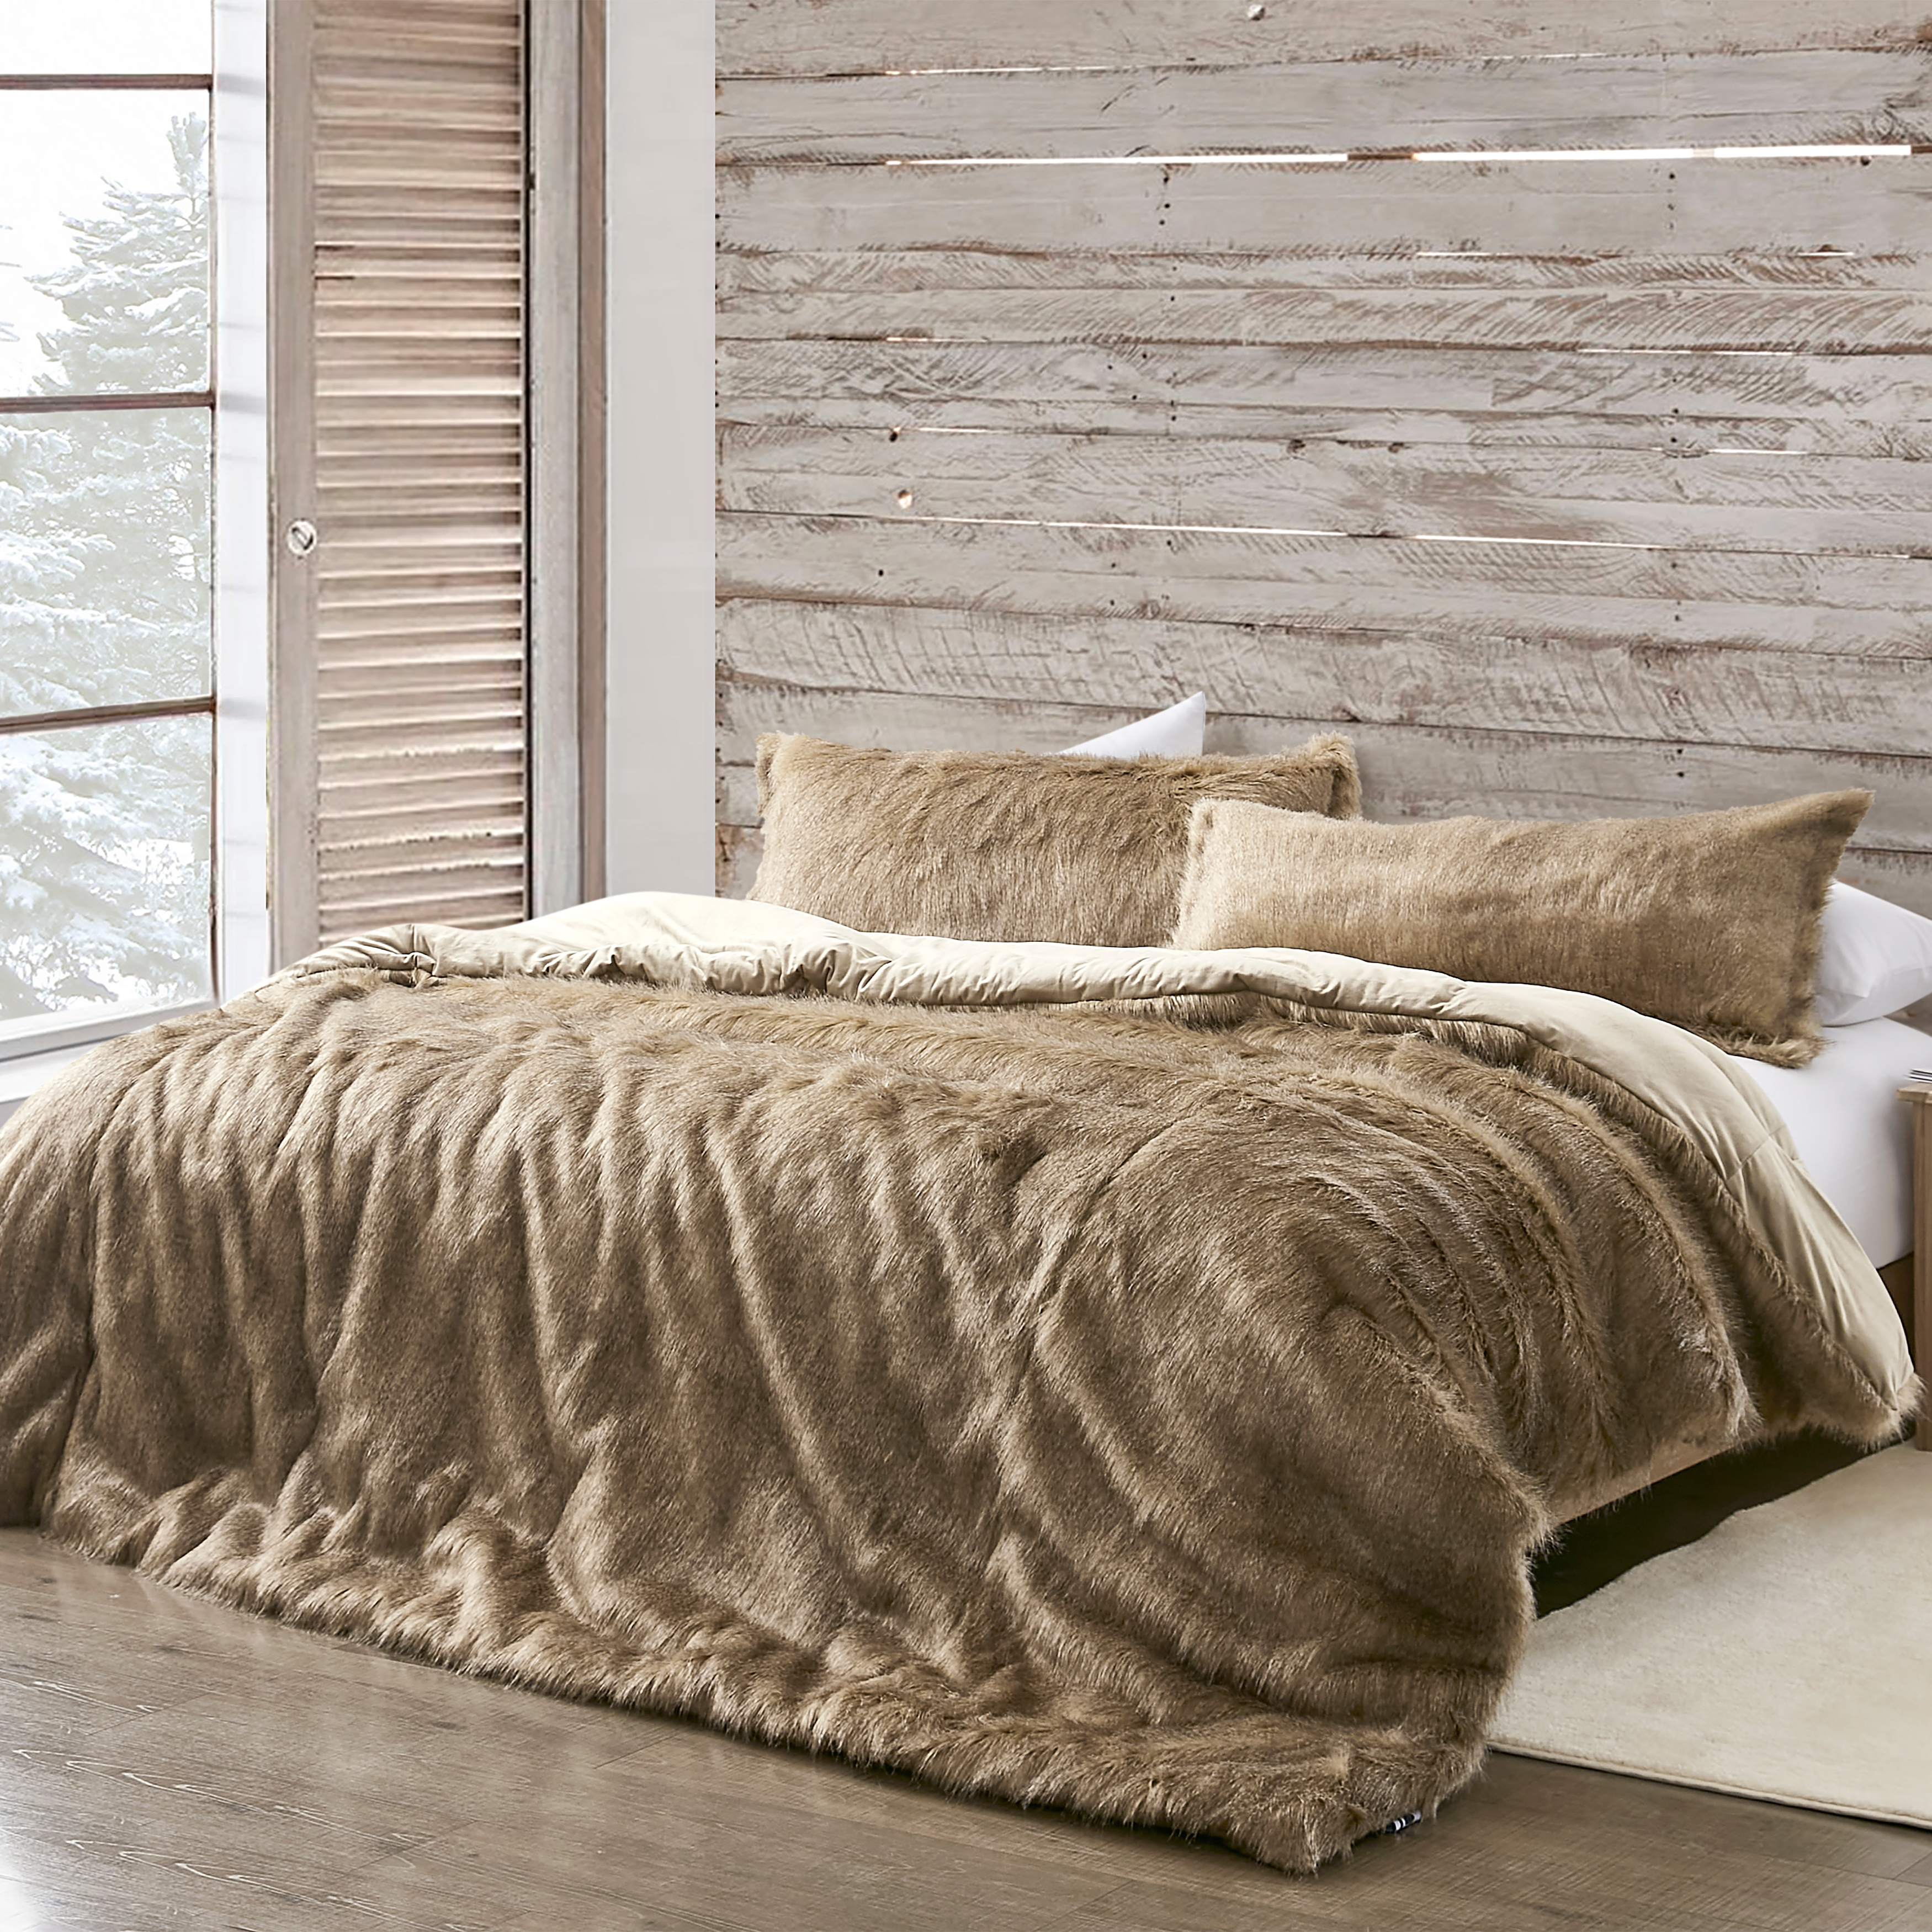 Machine Washable Plush King Extra Large Comforter Made with Cozy Faux Fur  Bedding Materials